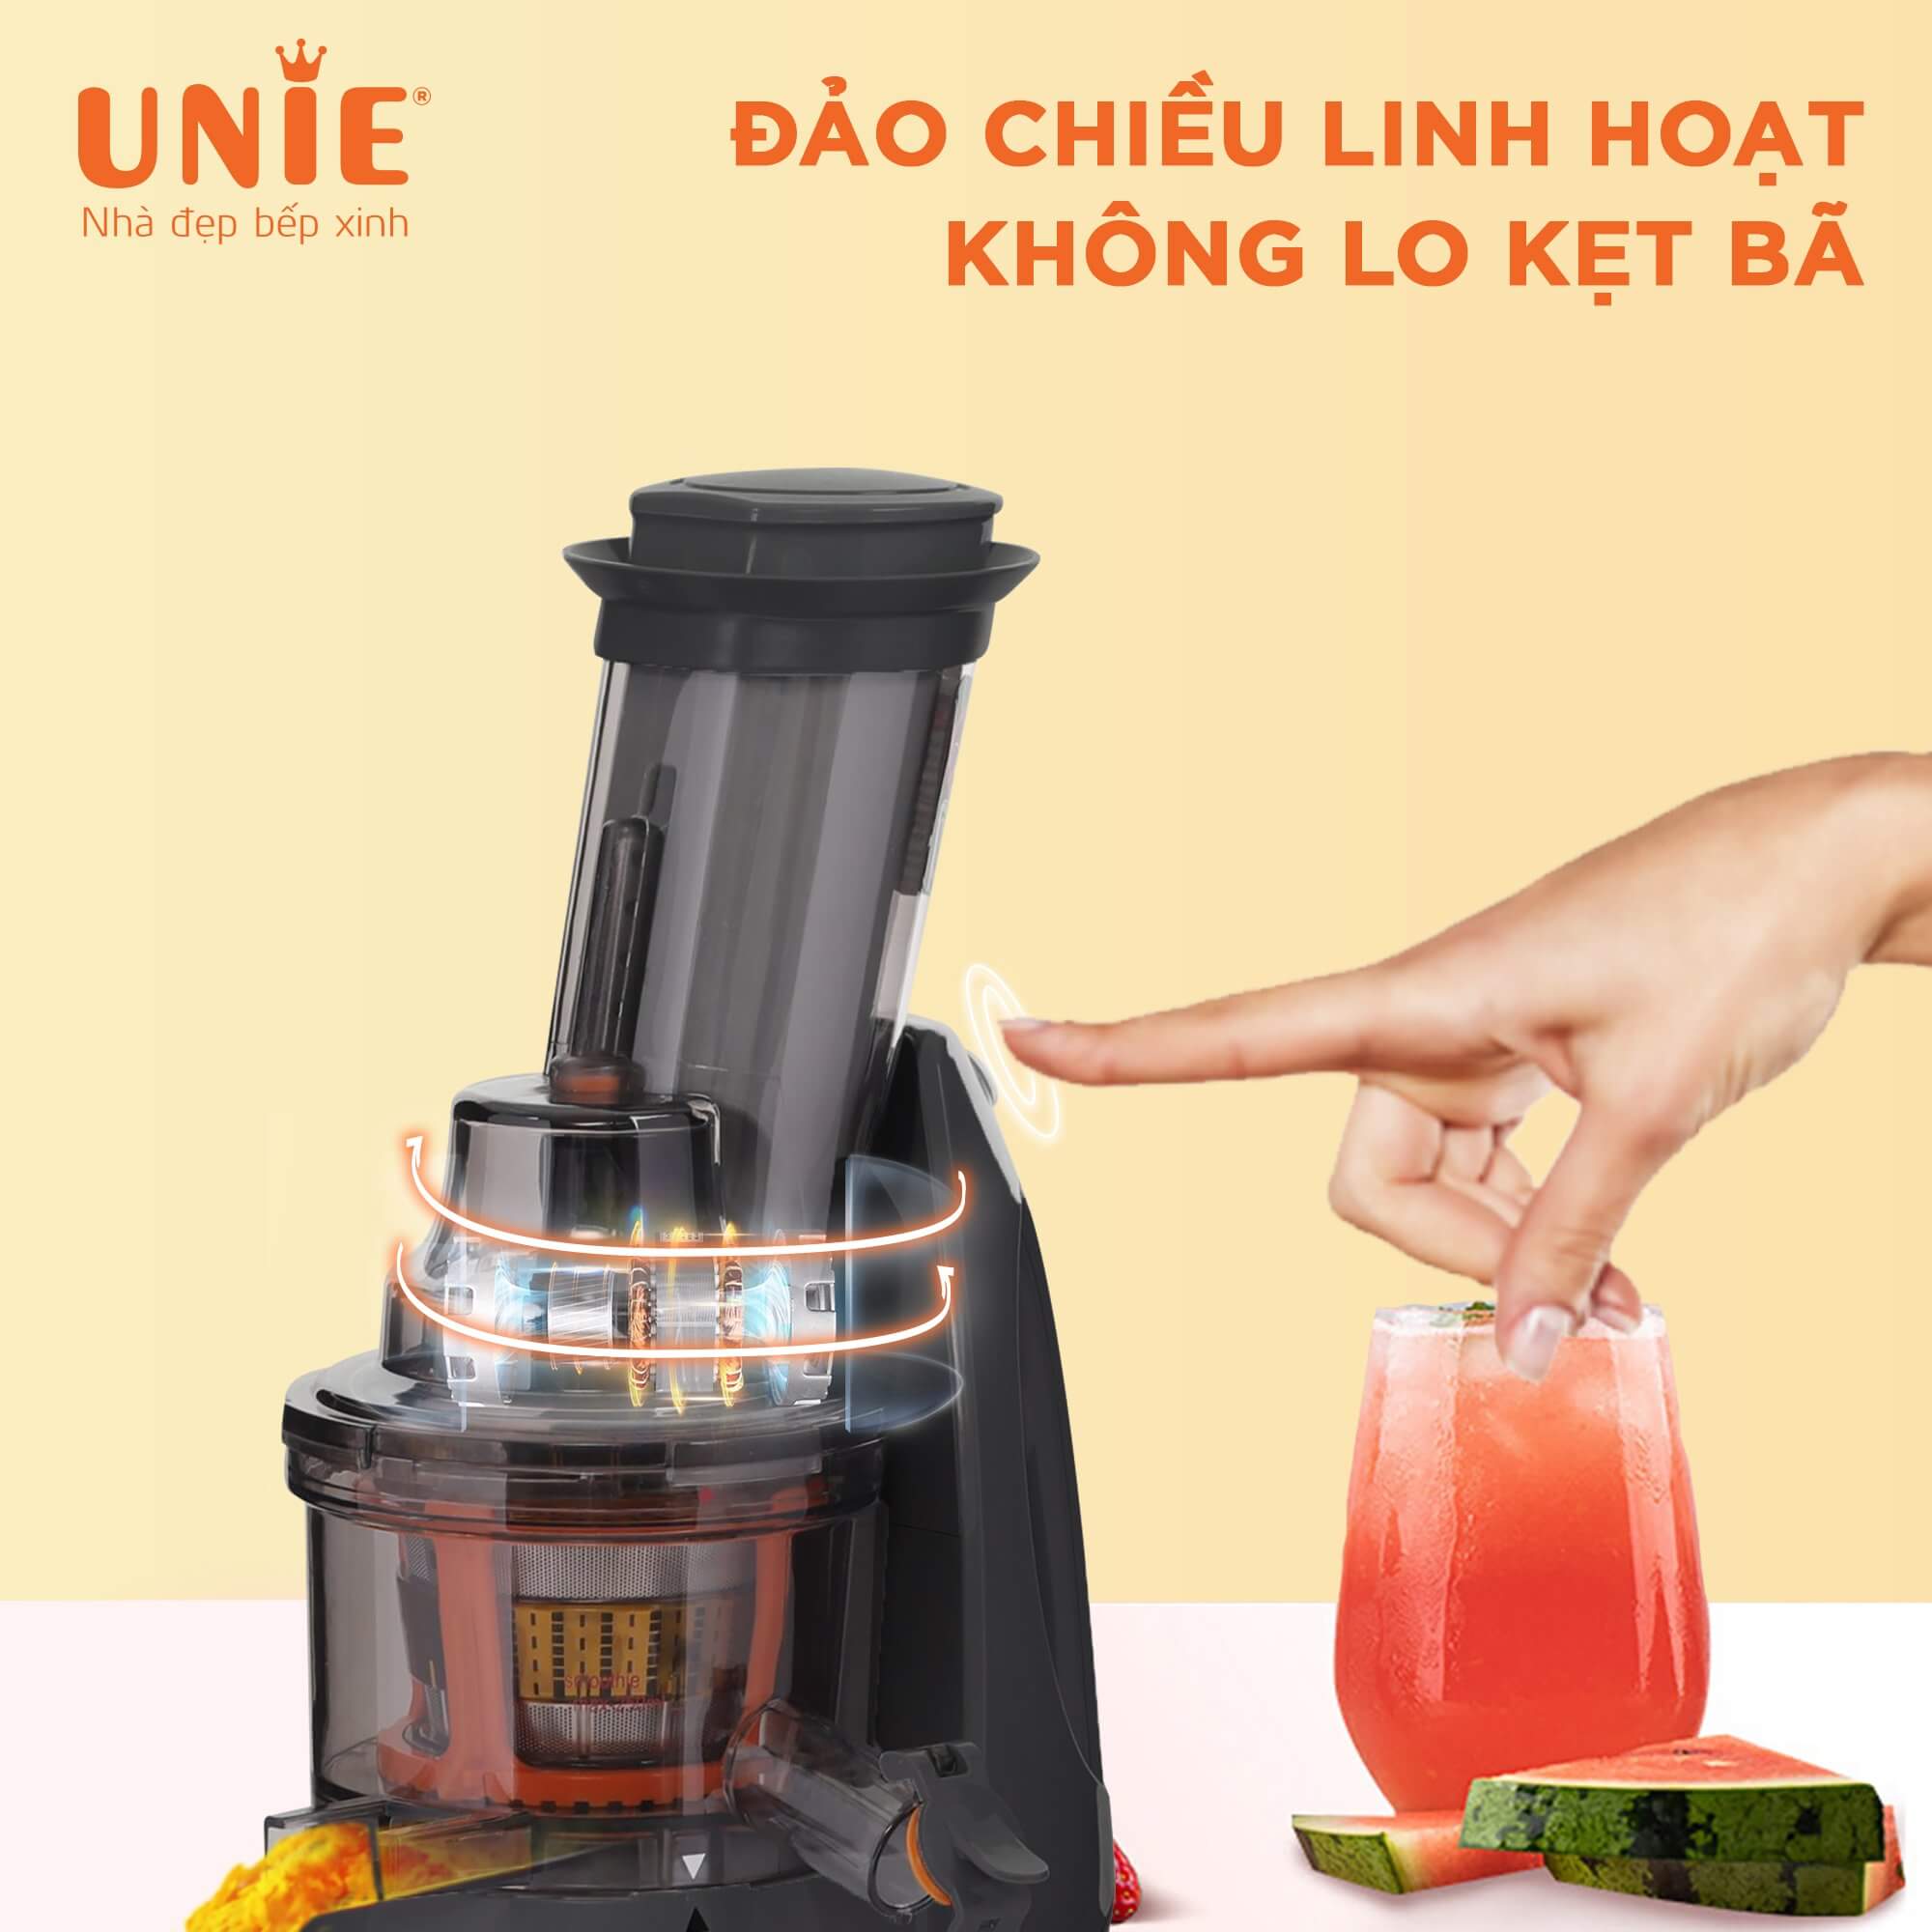 may-ep-cham-unie-ue580-dao-chieu-linh-hoat